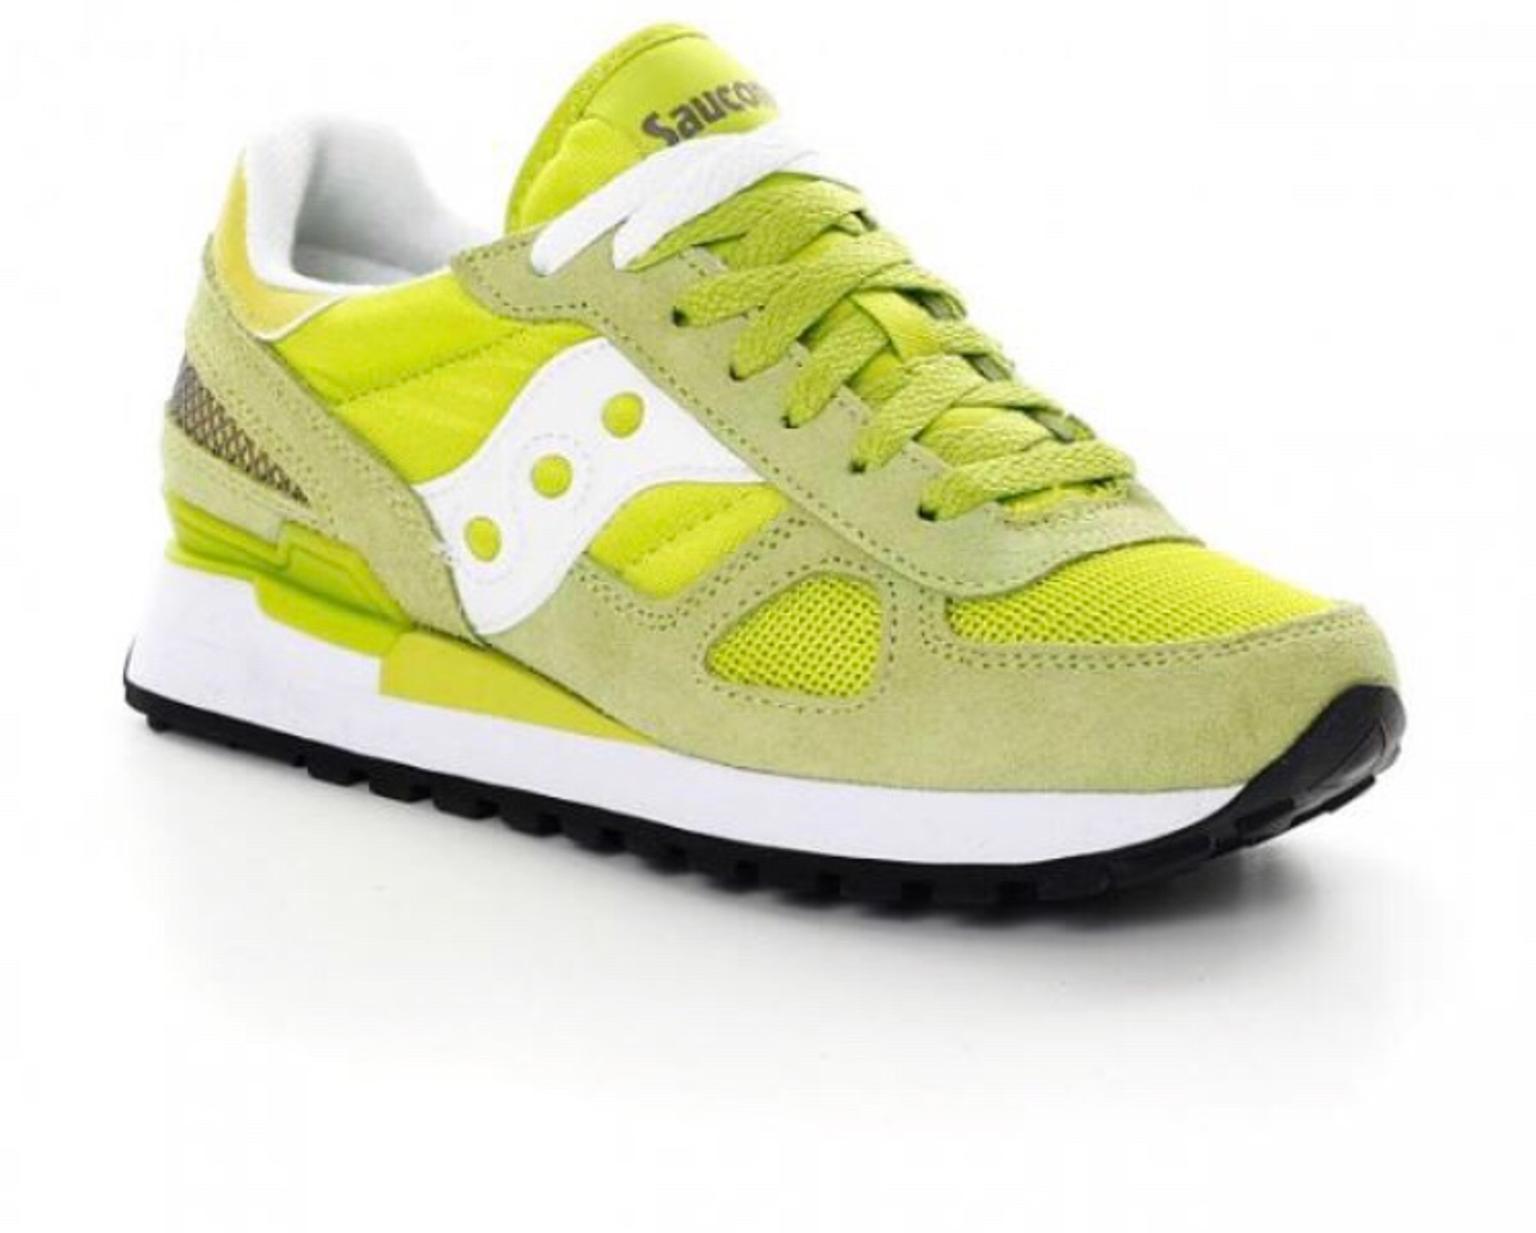 Saucony shadow giallo in 54027 Pontremoli for €30.00 for sale | Shpock